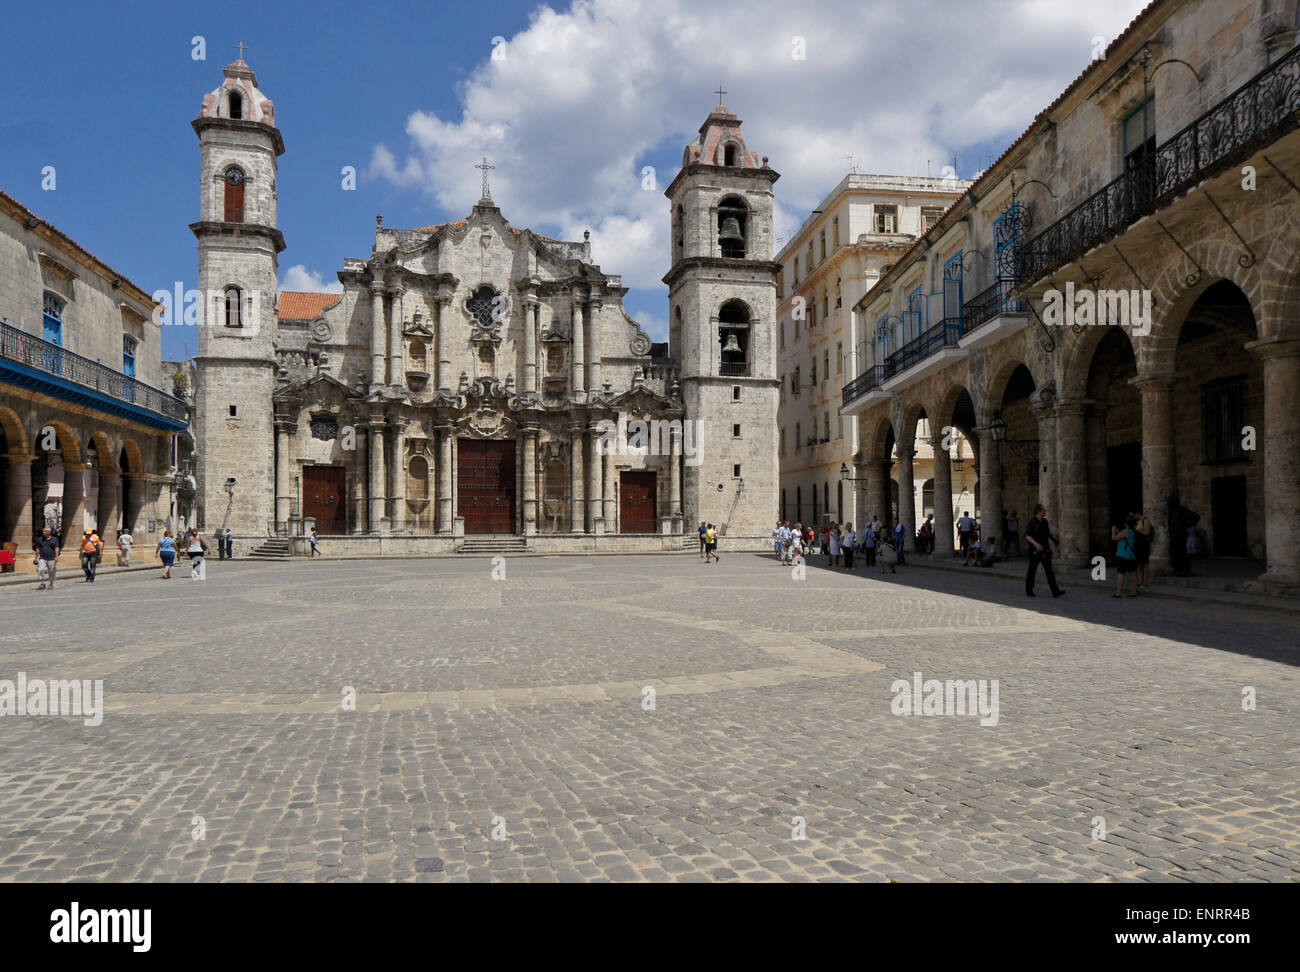 The cathedral on Plaza de la Catedral (Cathedral Square), Habana Vieja (Old Havana), Cuba Stock Photo